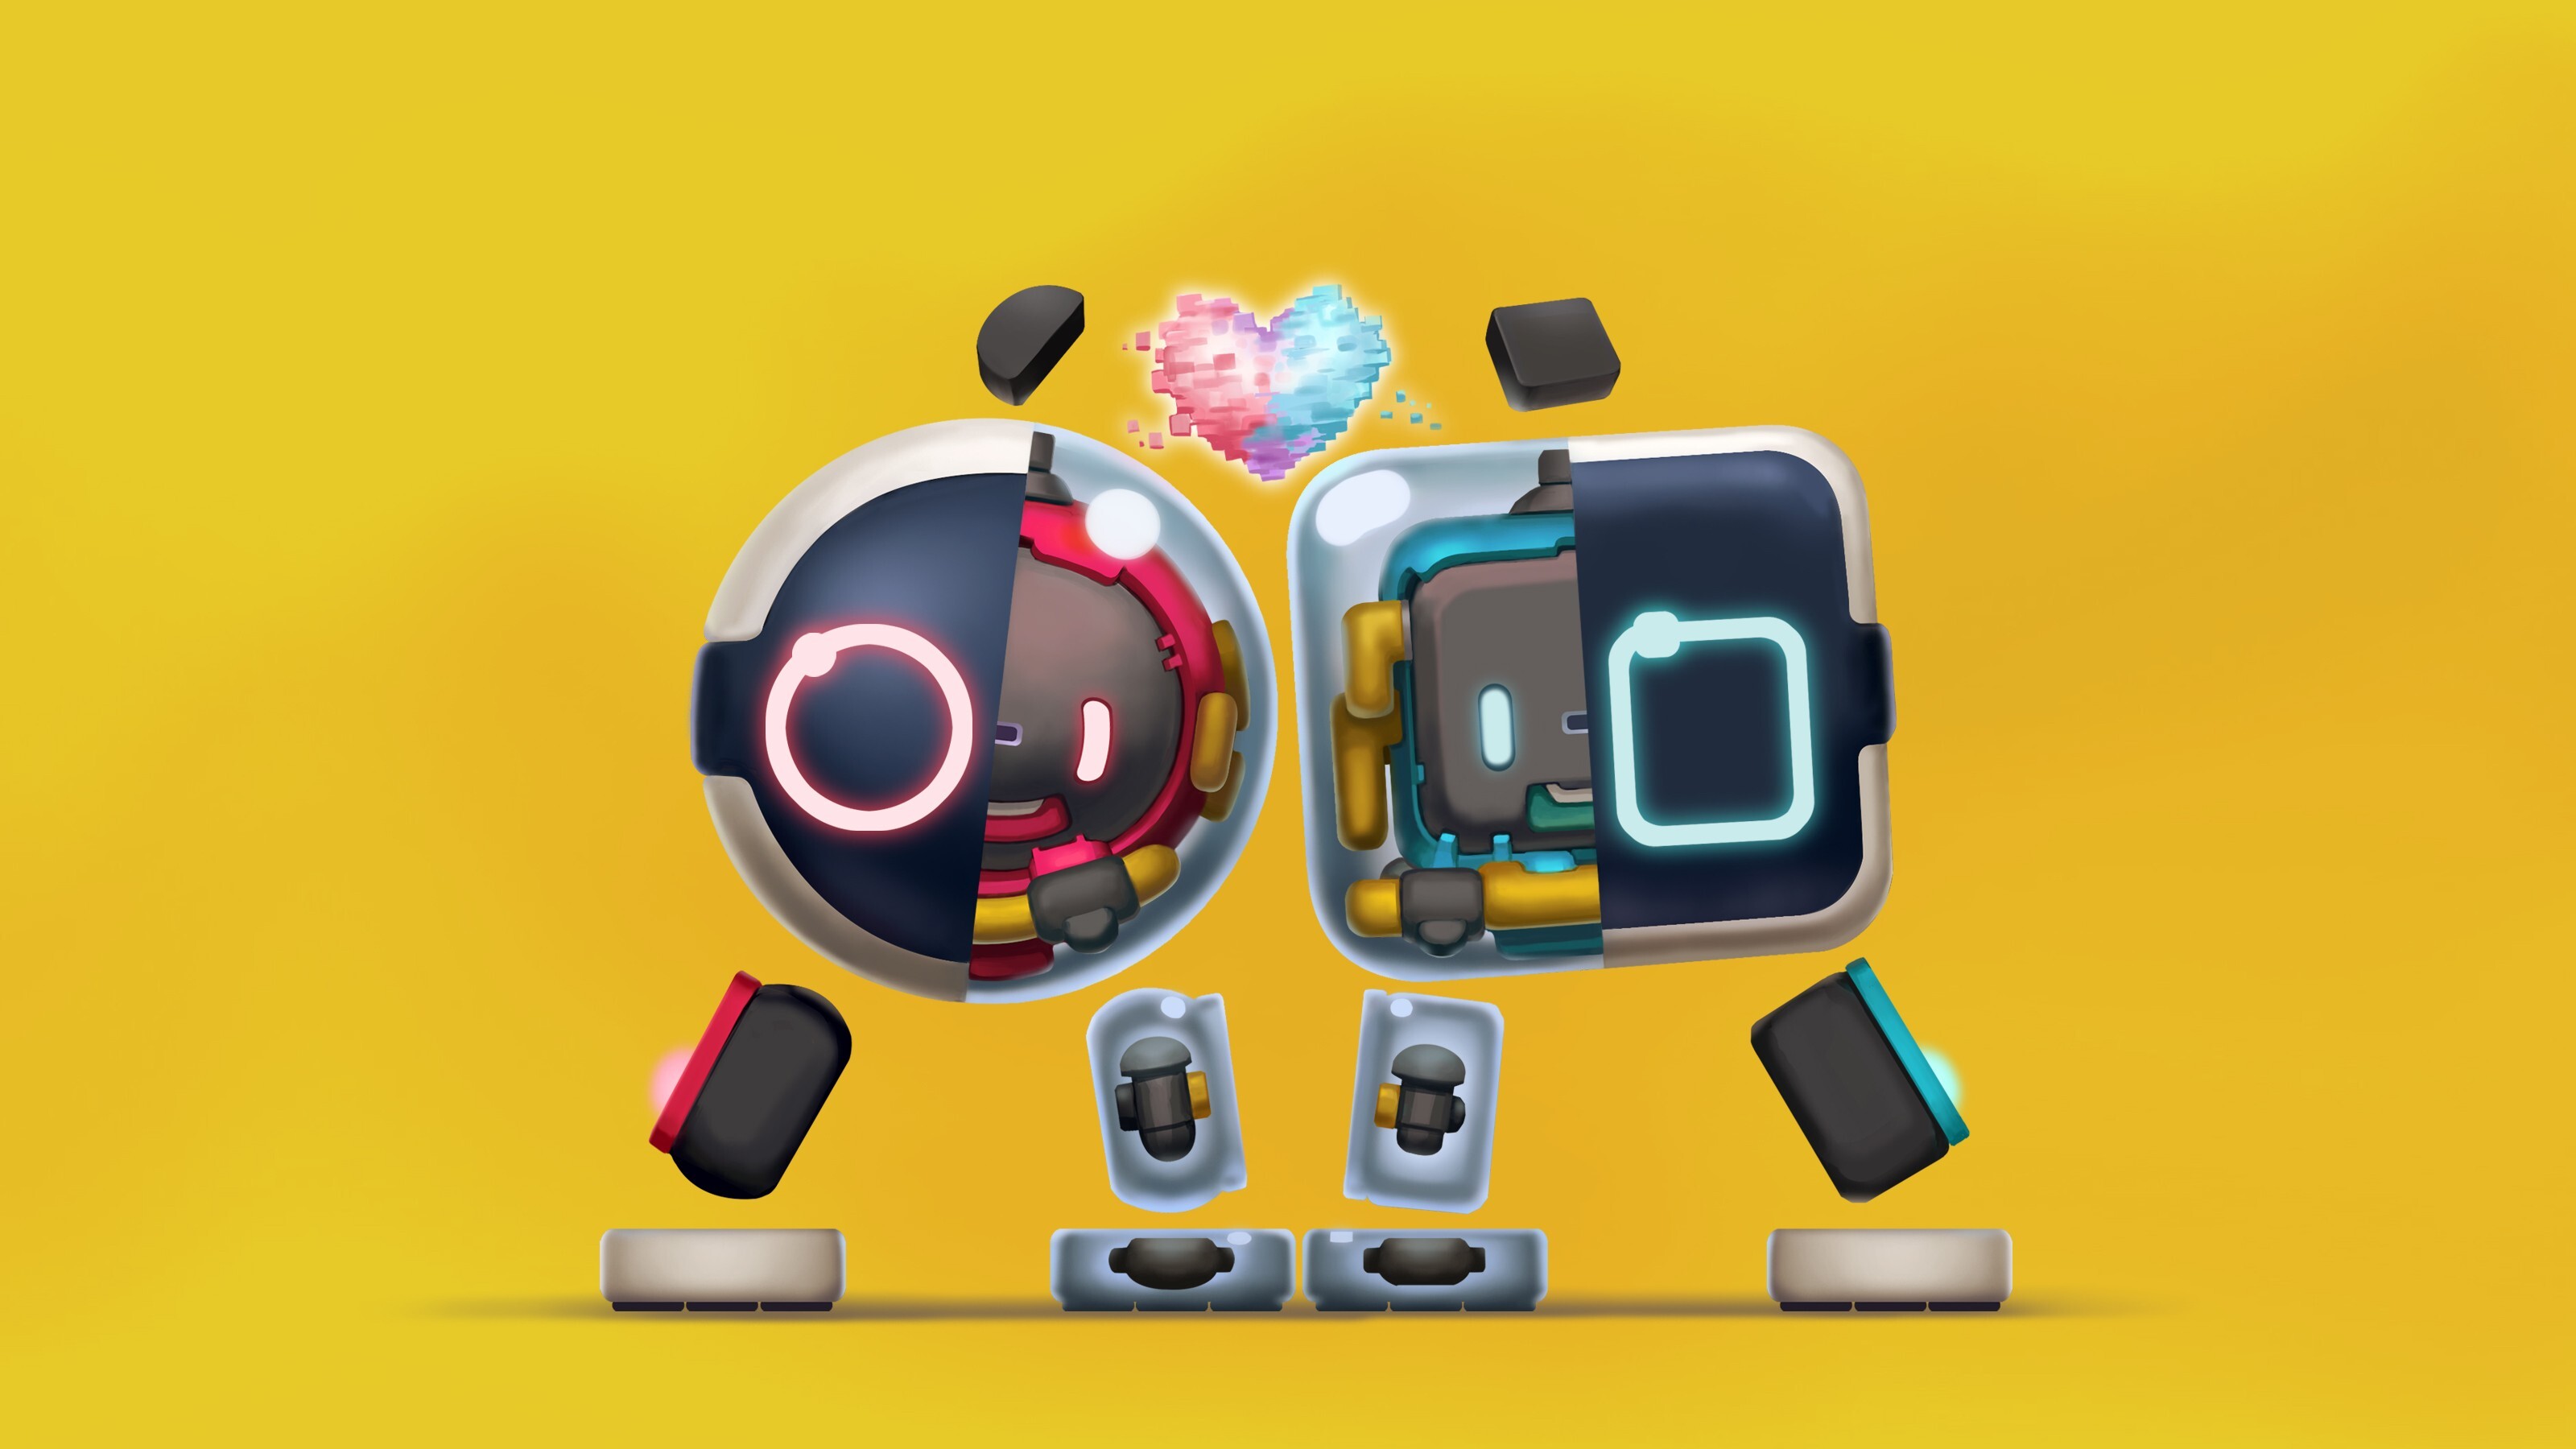 Made by Next Studios, Biped is a cooperative game that follows the adventures of two robots. (Picture: Next Studios)